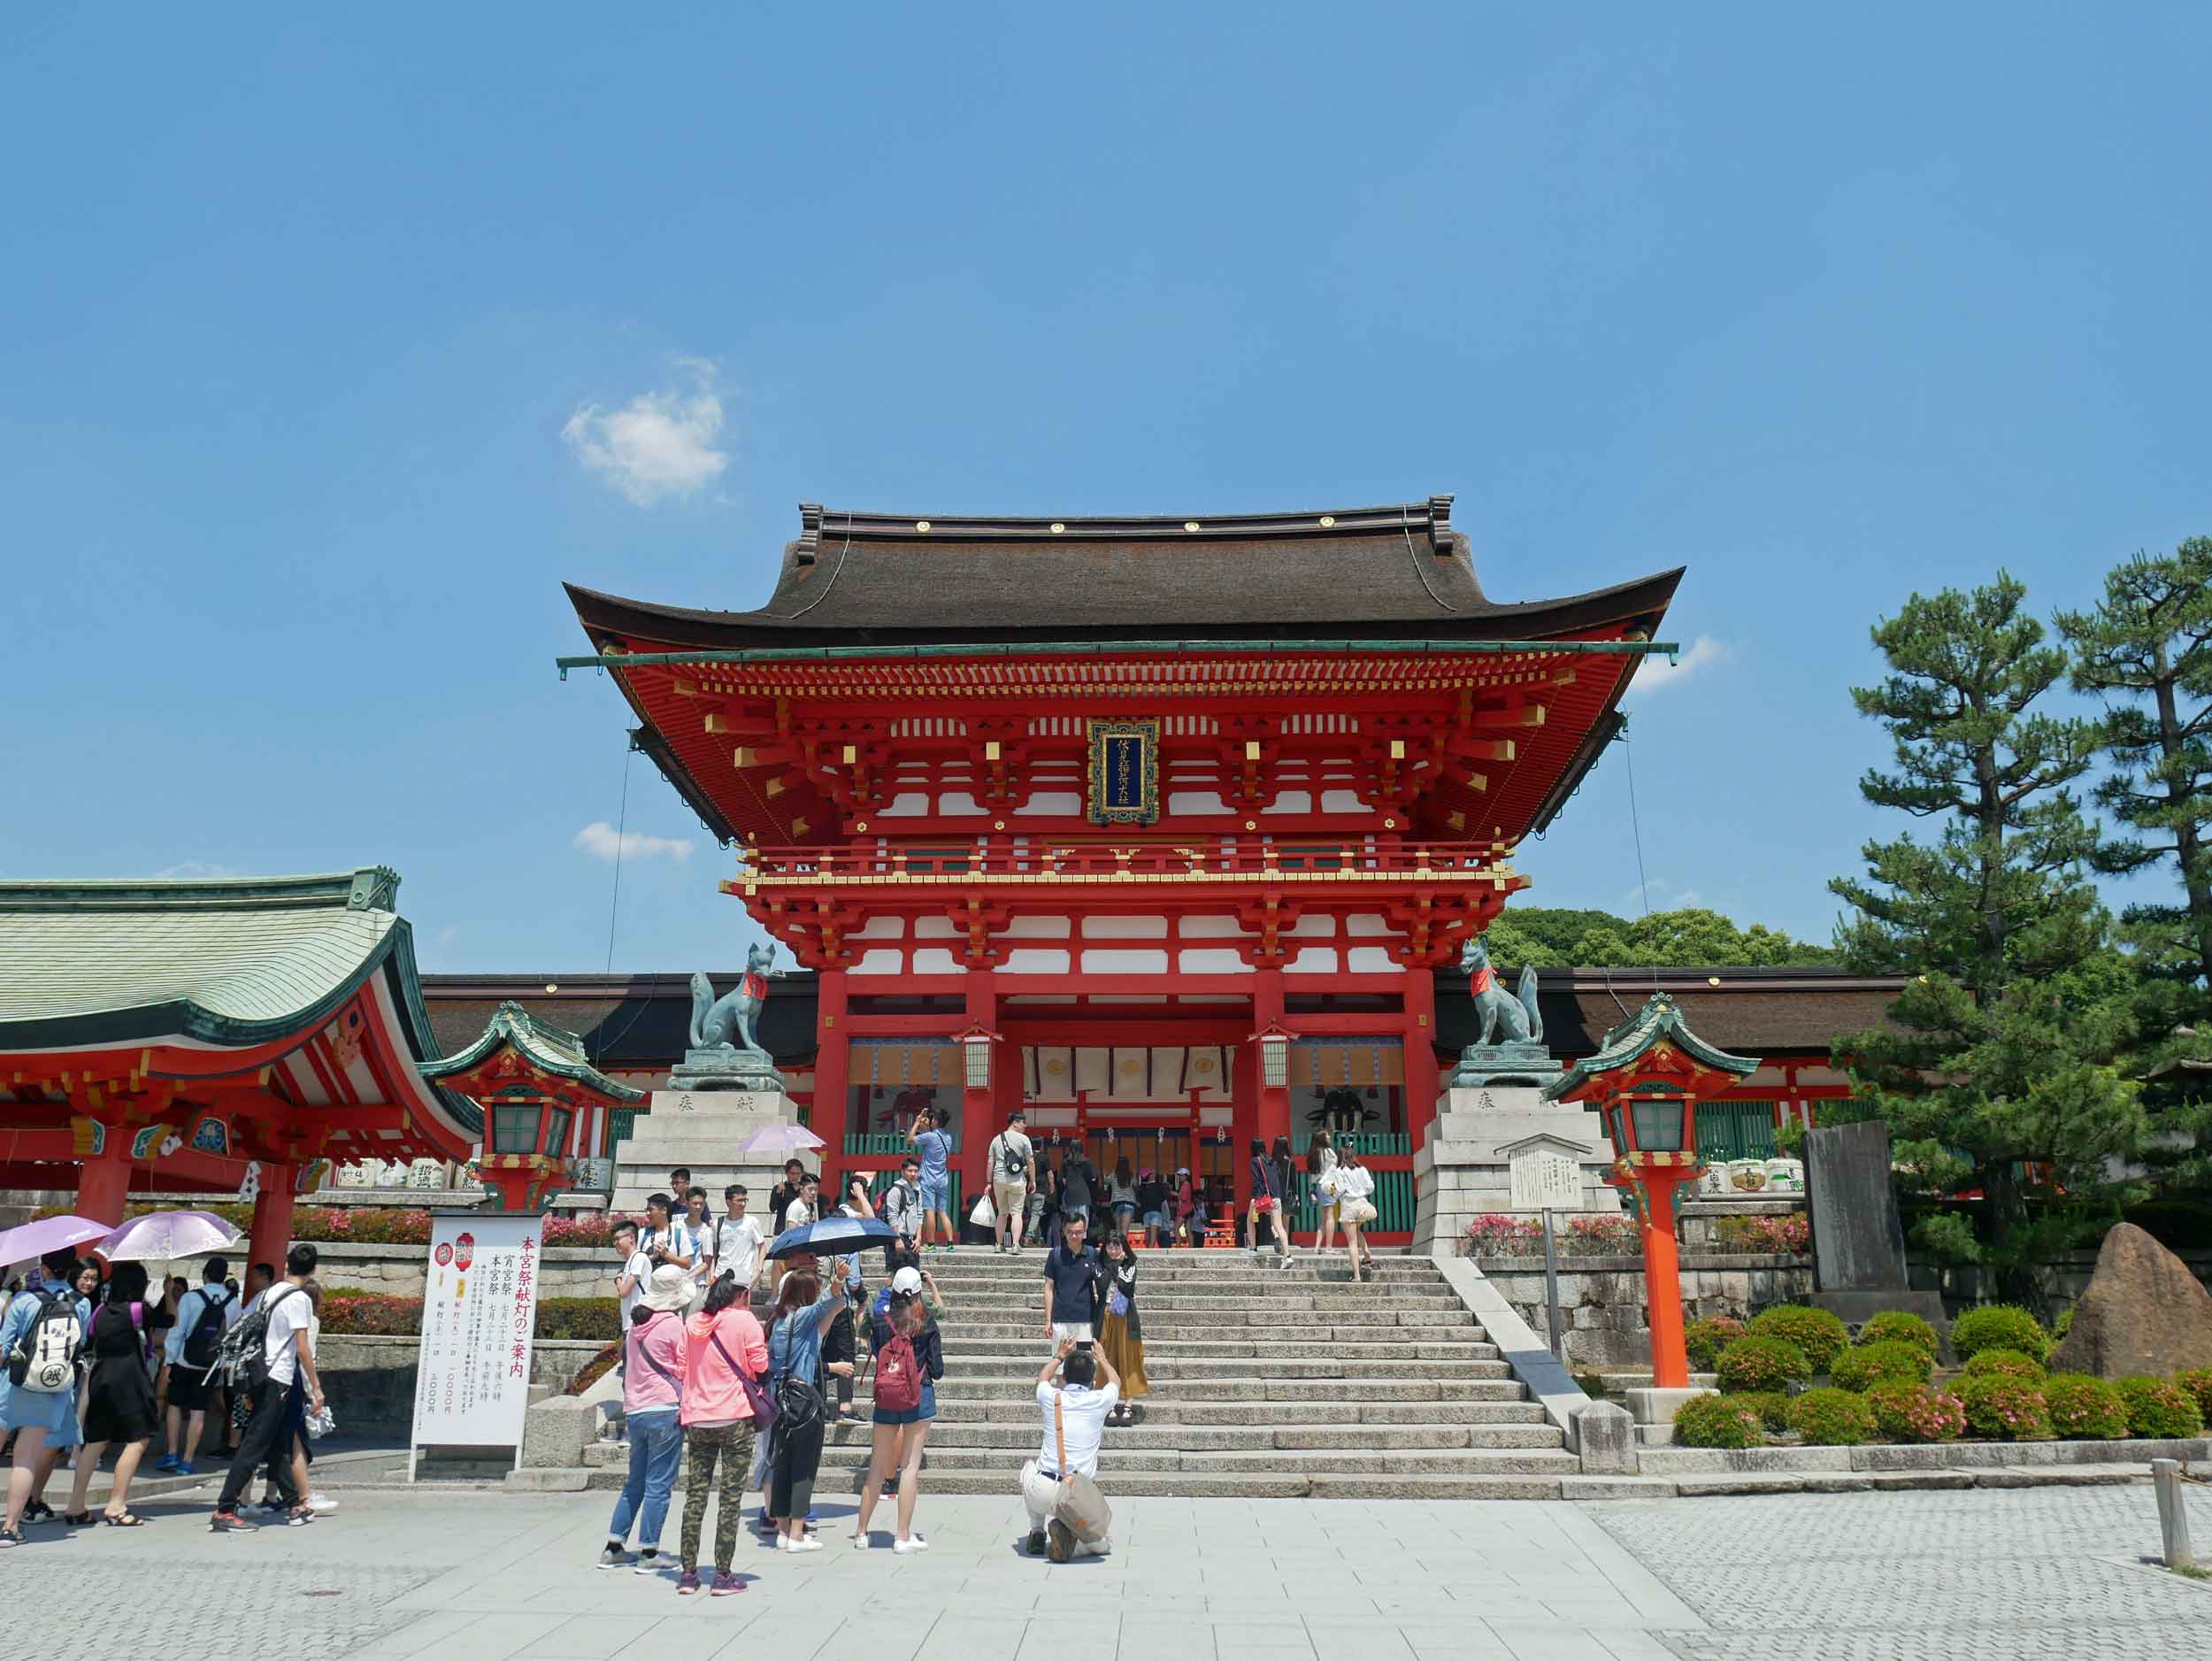  Arriving in Kyoto, we made our way to Fushimi Inari-taisha, a shrine dedicated to the fox.&nbsp; 